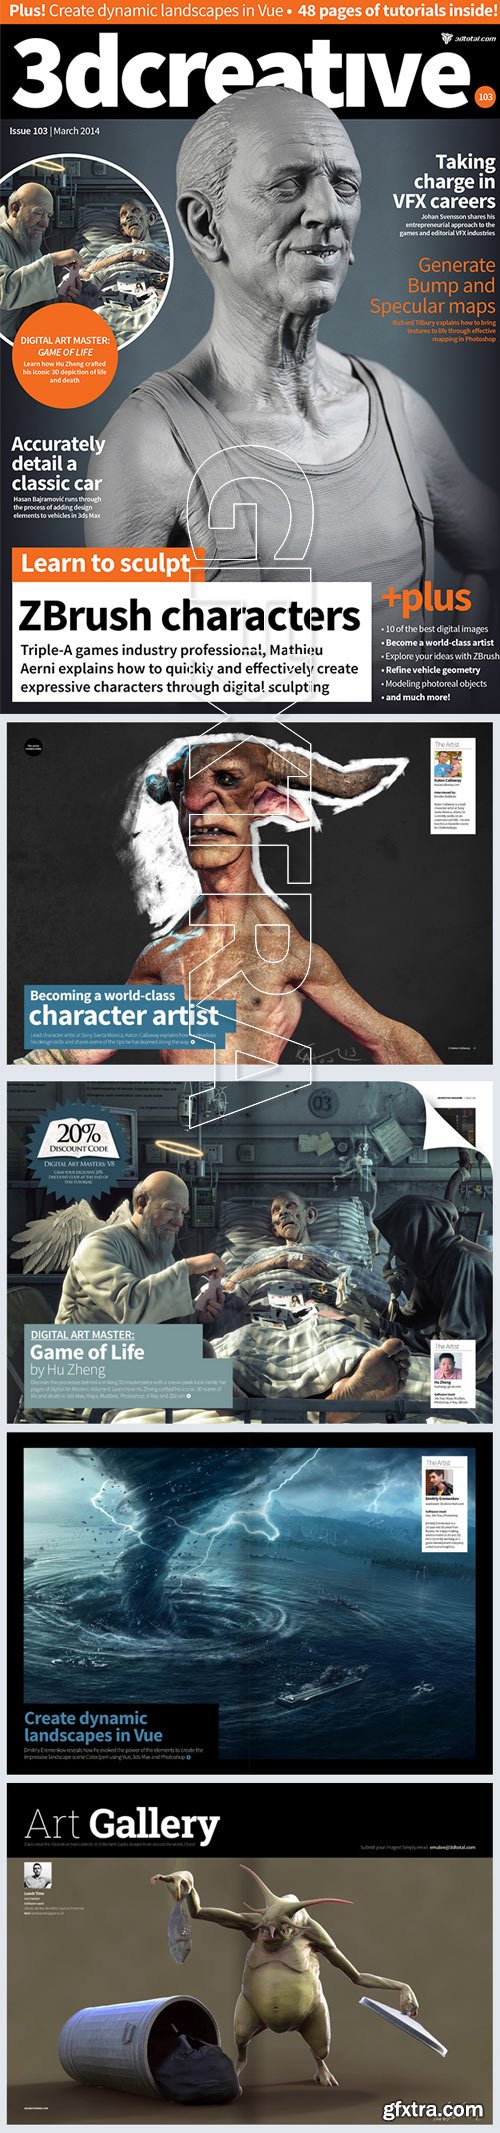 3DCreative: Issue 103 - March 2014 HiRes